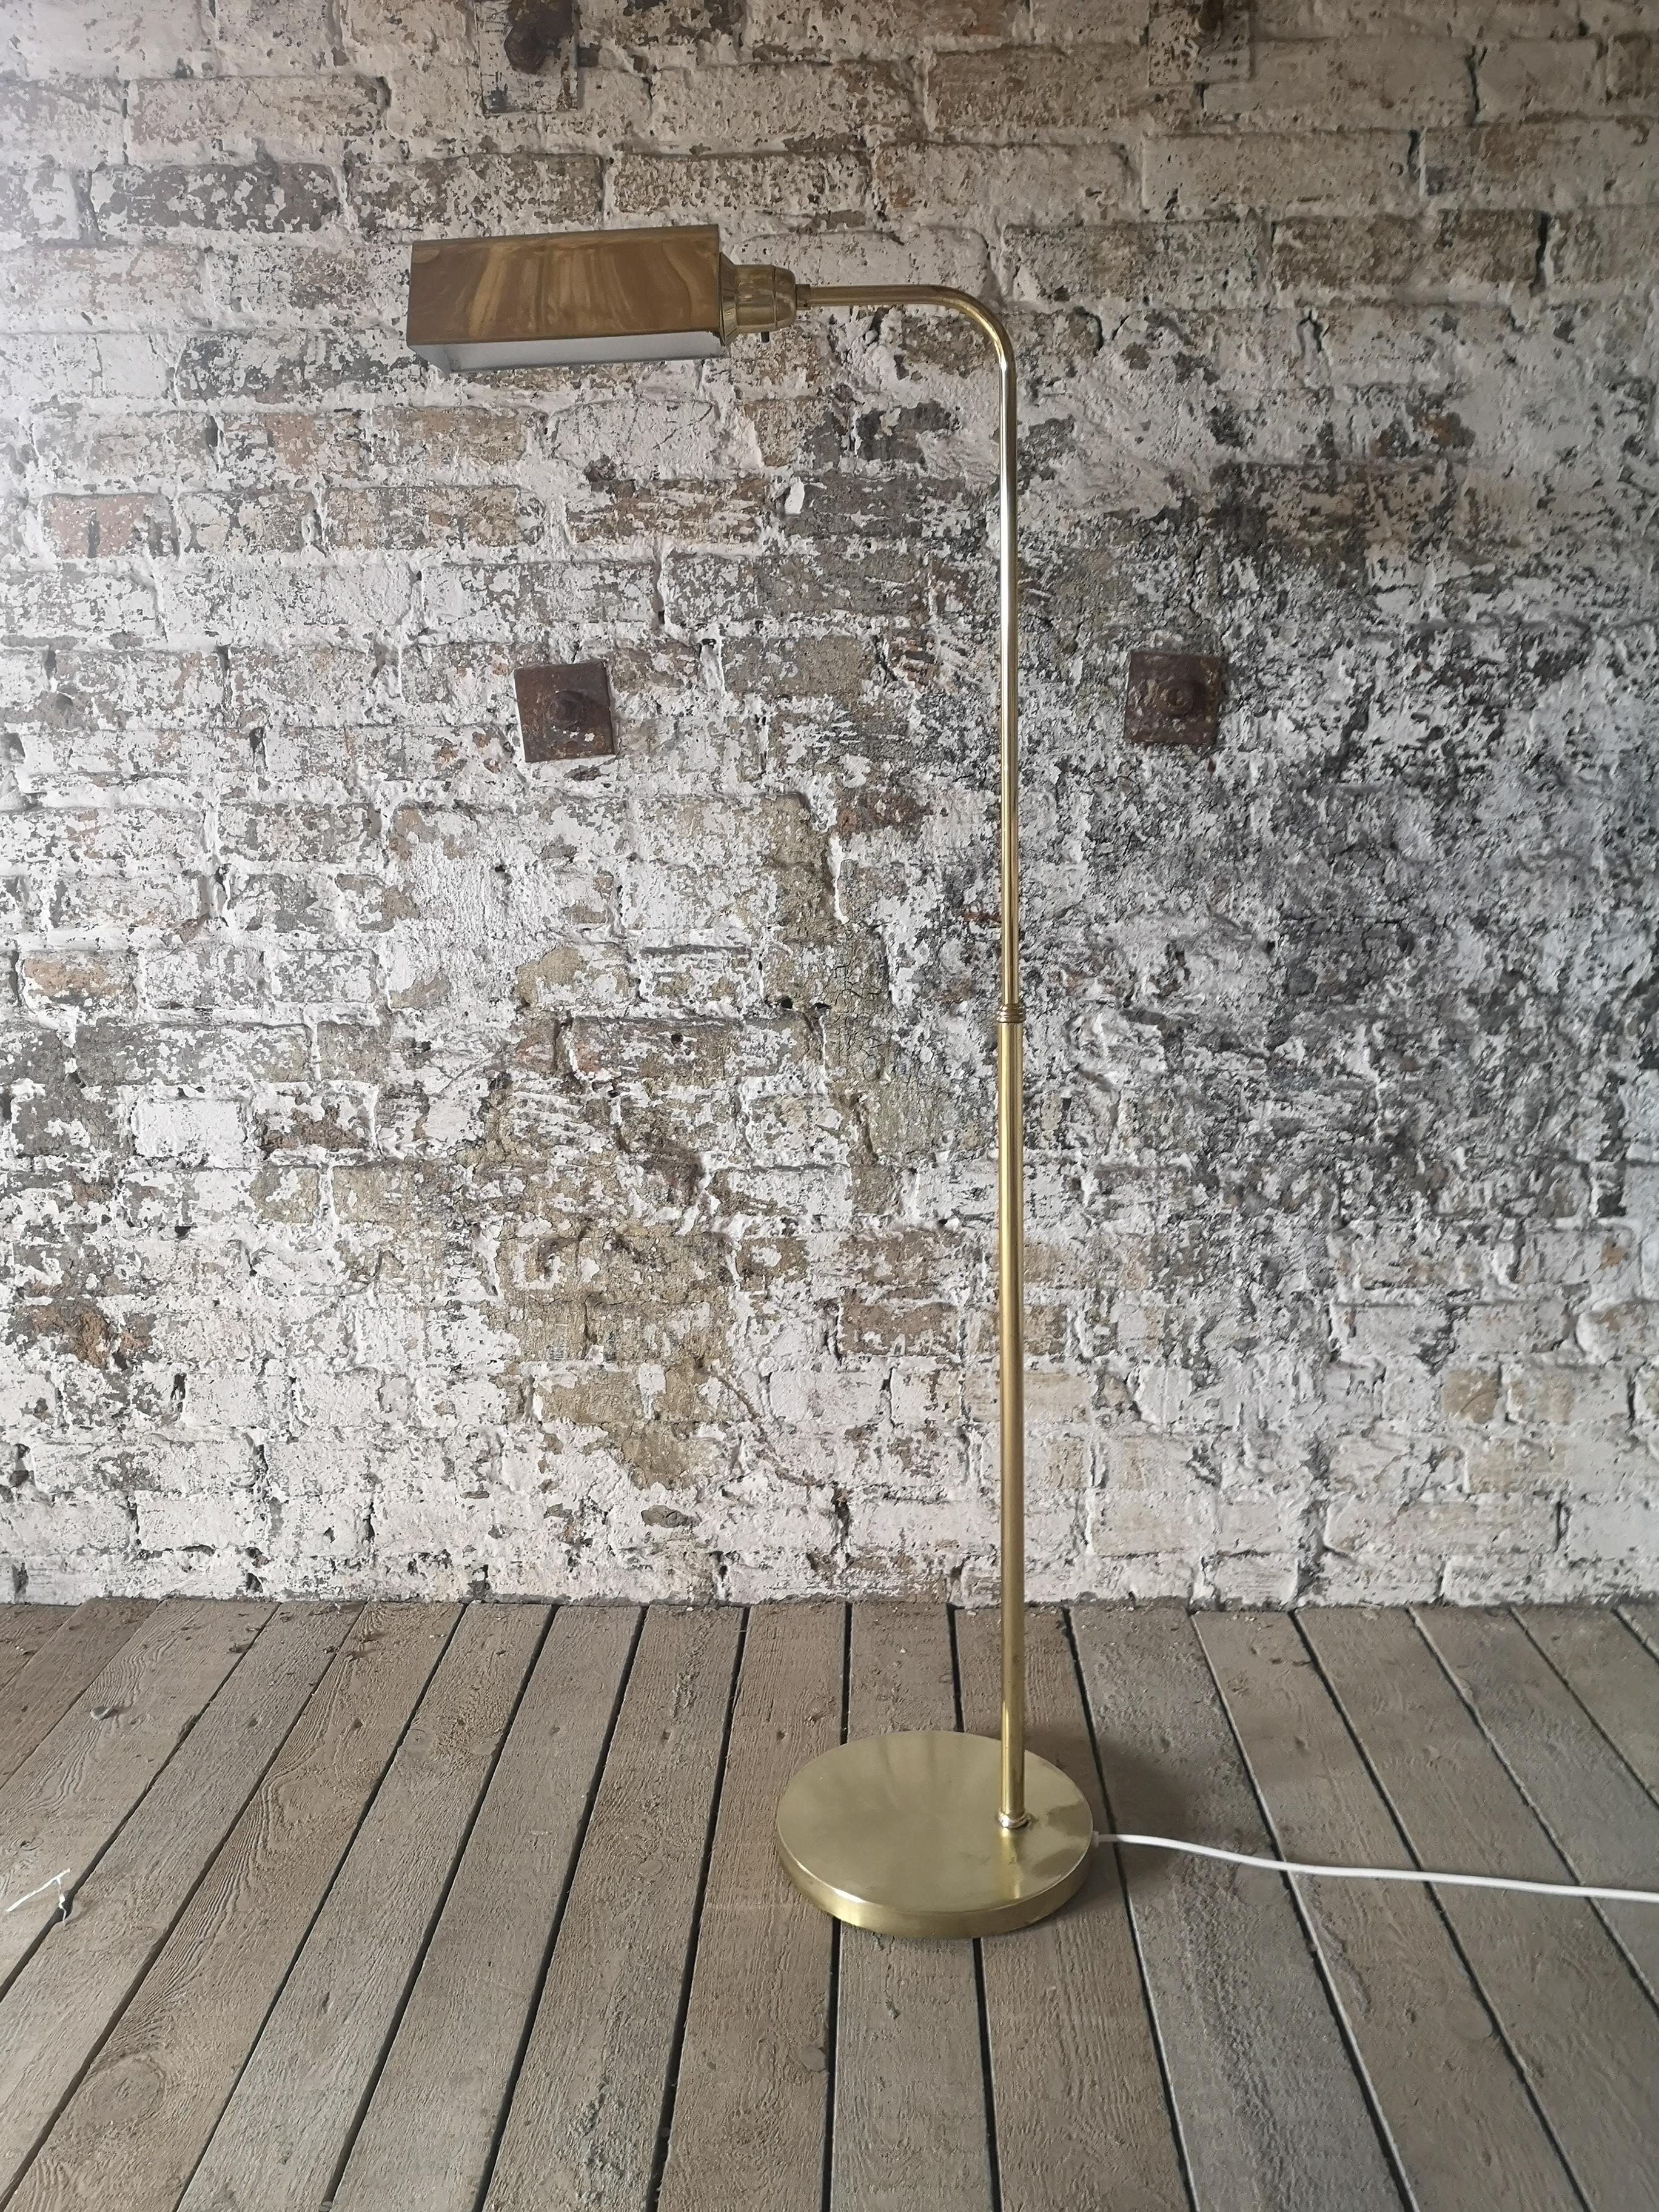 This nice brass floor lamp produced in Sweden at Ewå, was designed by Erik Wermå.
The lamp has a nice brass structure and gives that cool 1970s into 1980s look.  

Condition: Good condition. Minor flaws. New wiring

Measures: H 126, W 42